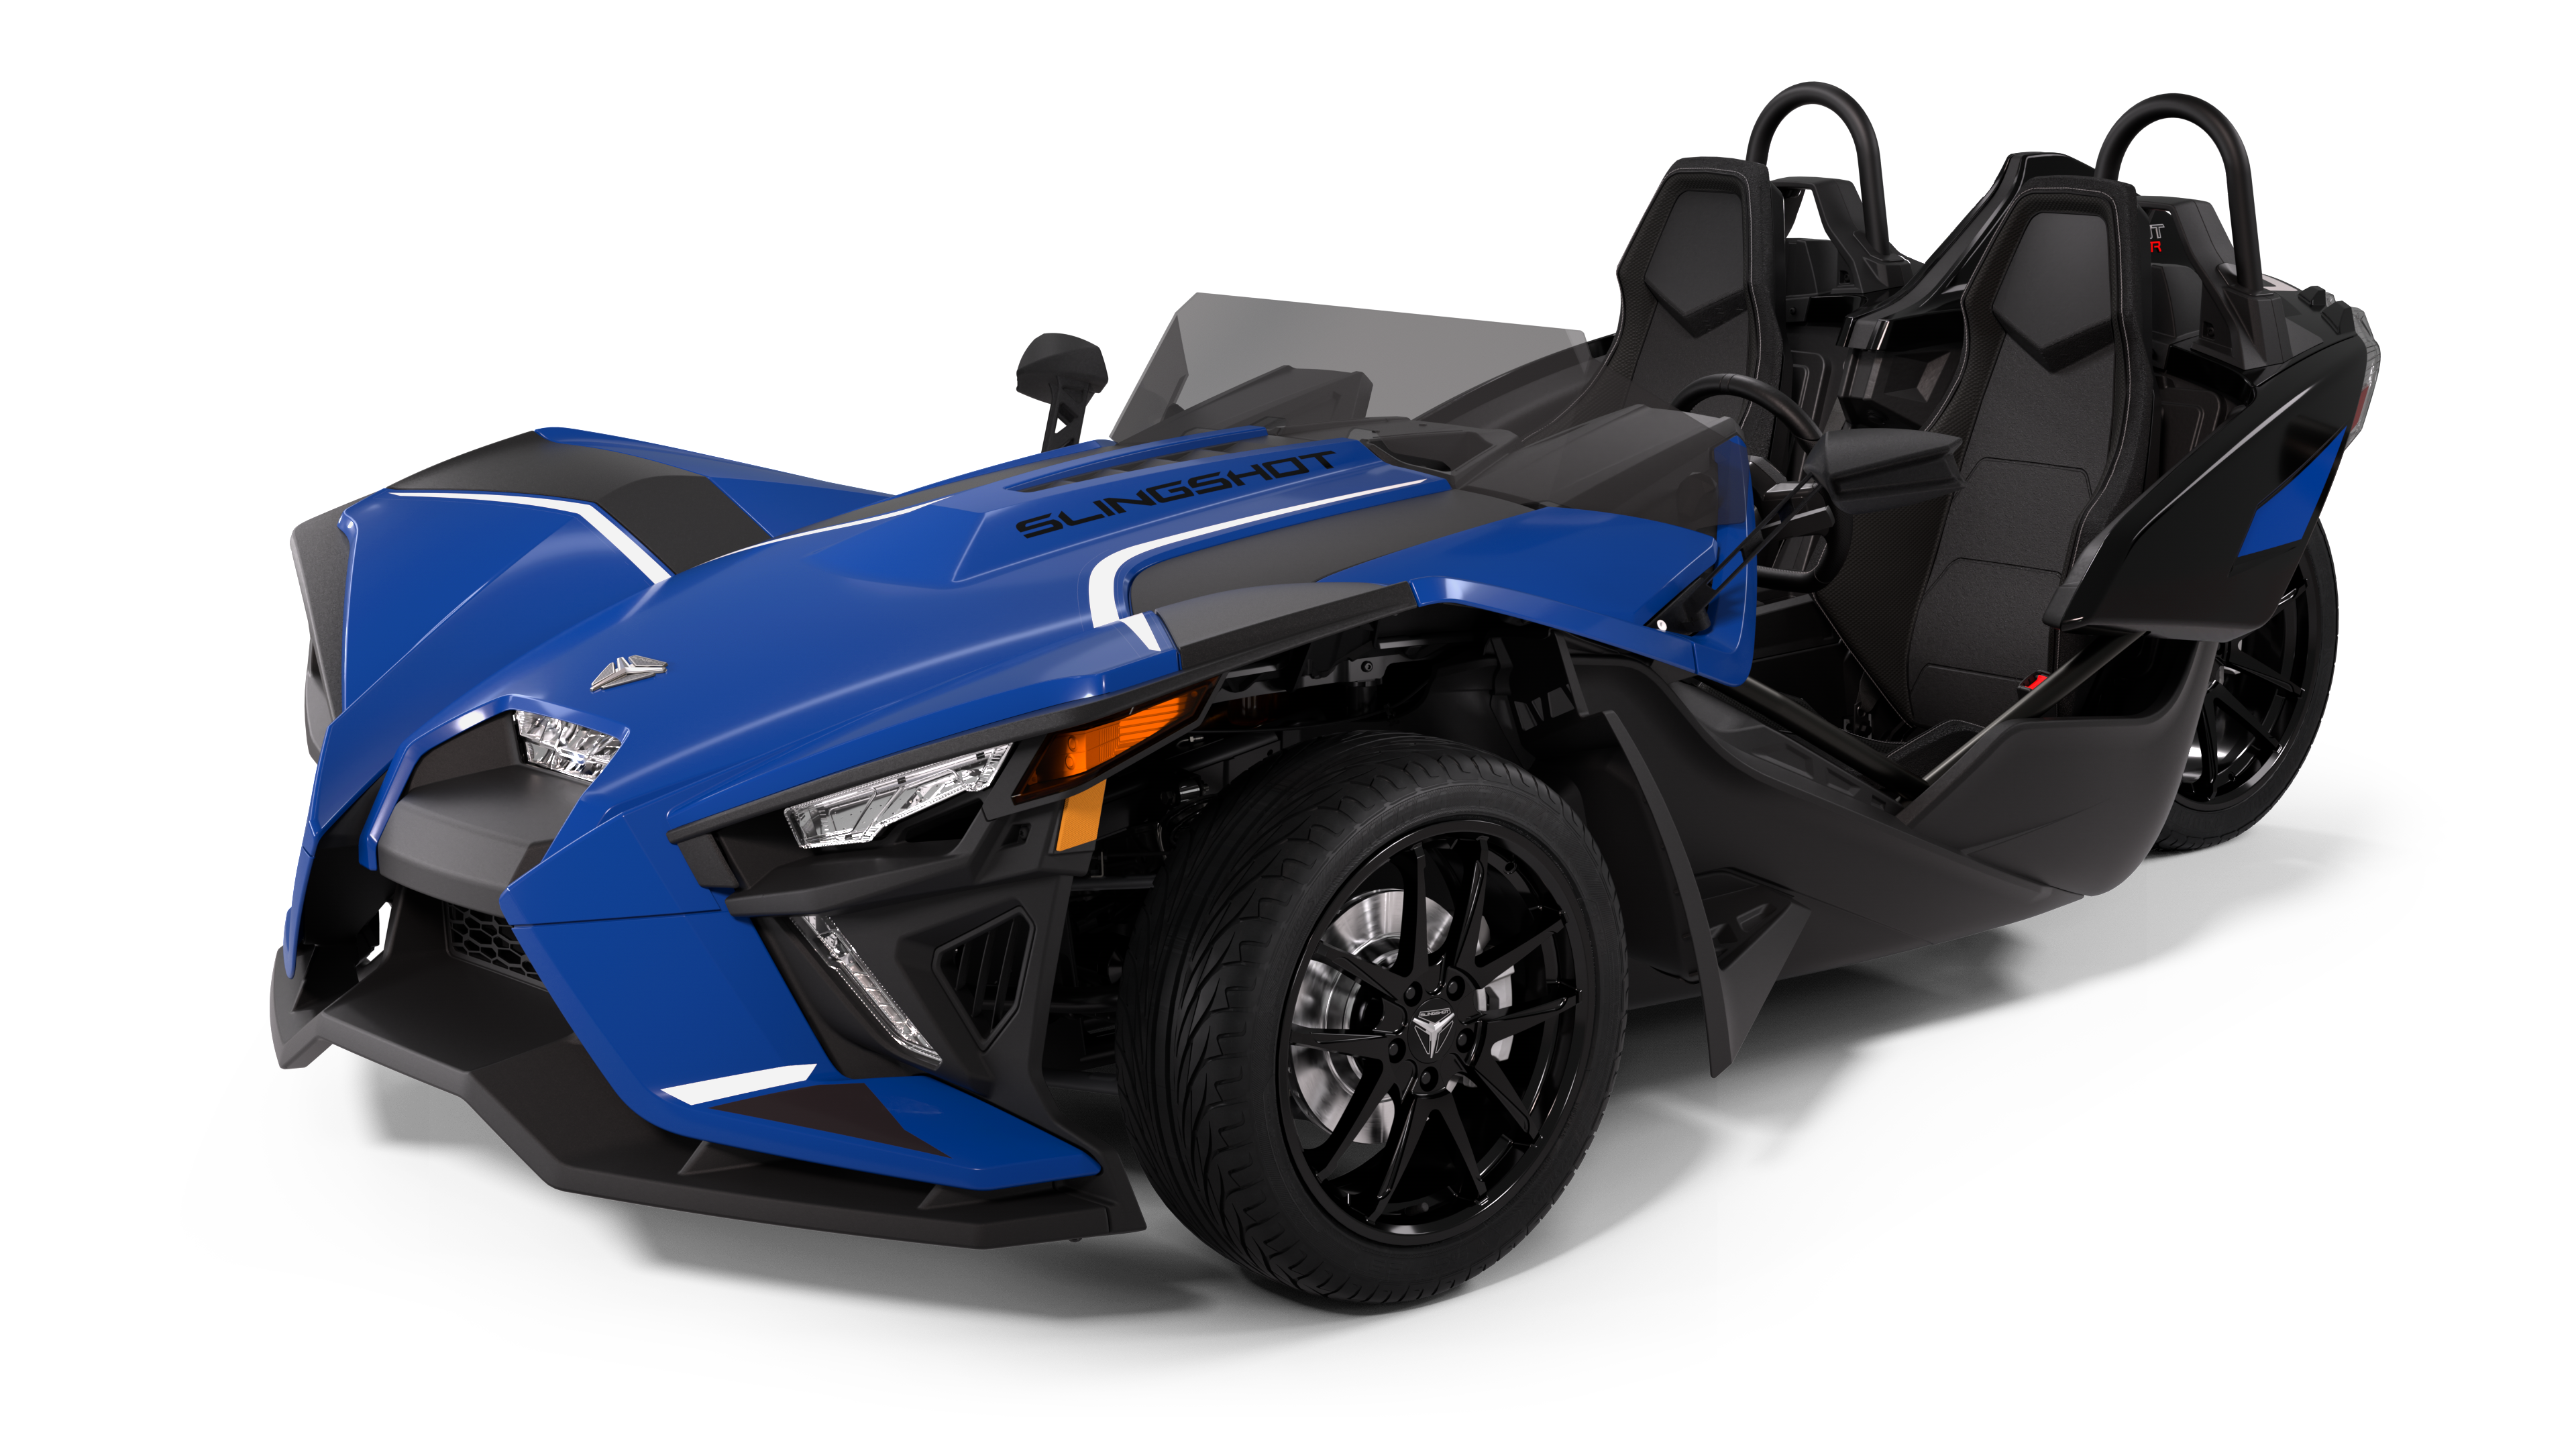 2023 Polaris Slingshot® SLR - AutoDrive for sale in the Pompano Beach, FL area. Get the best drive out price on 2023 Polaris Slingshot® SLR - AutoDrive and compare.